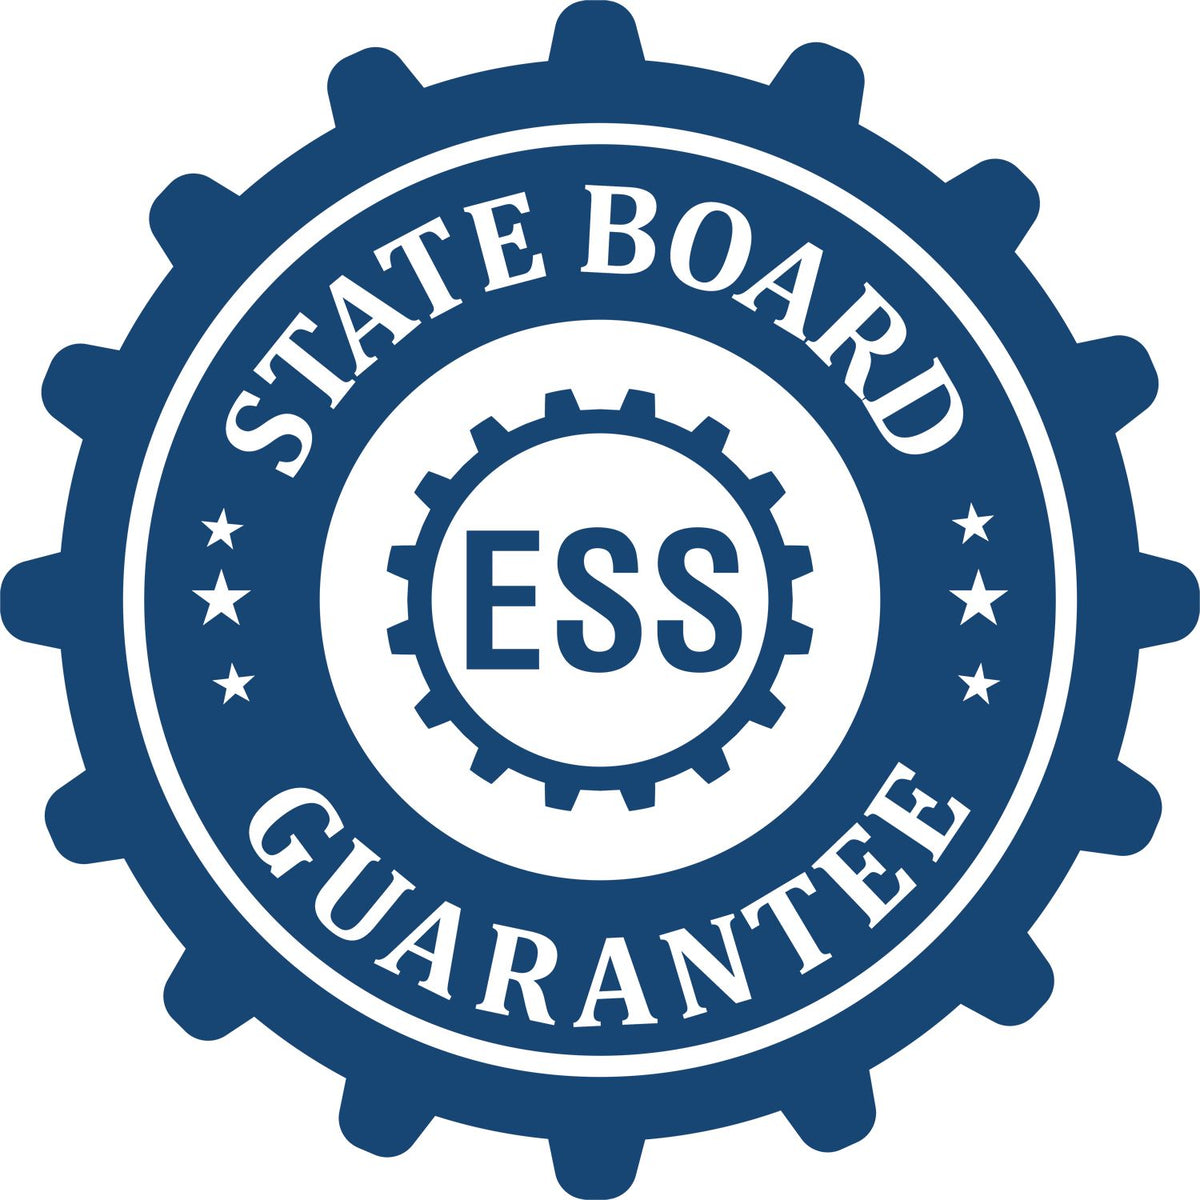 An emblem in a gear shape illustrating a state board guarantee for the Oregon Geologist Desk Seal